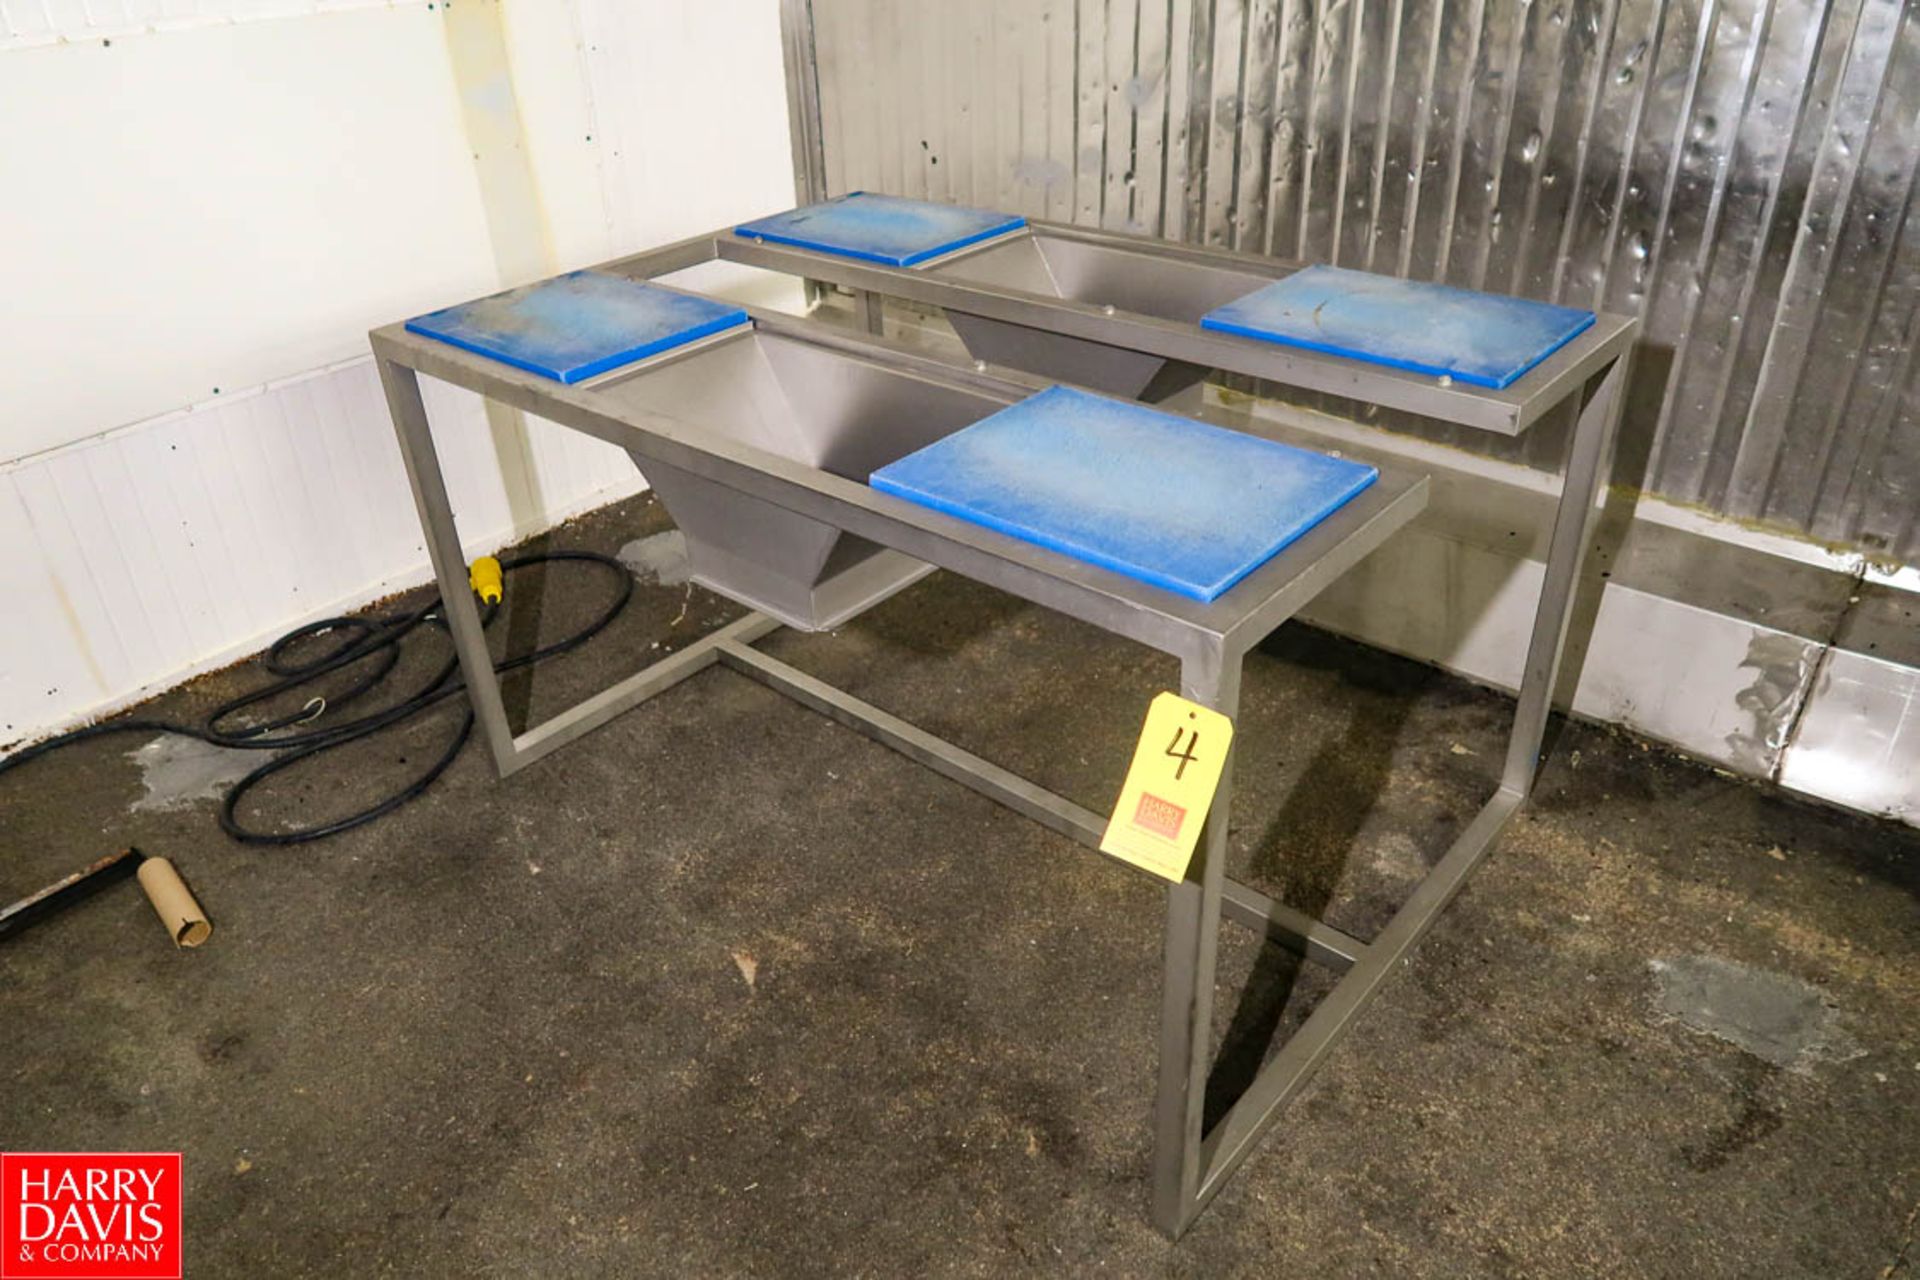 S/S Dual Station Prep Table 59" x 42" x 33". Rigging Fee: $ 10.00